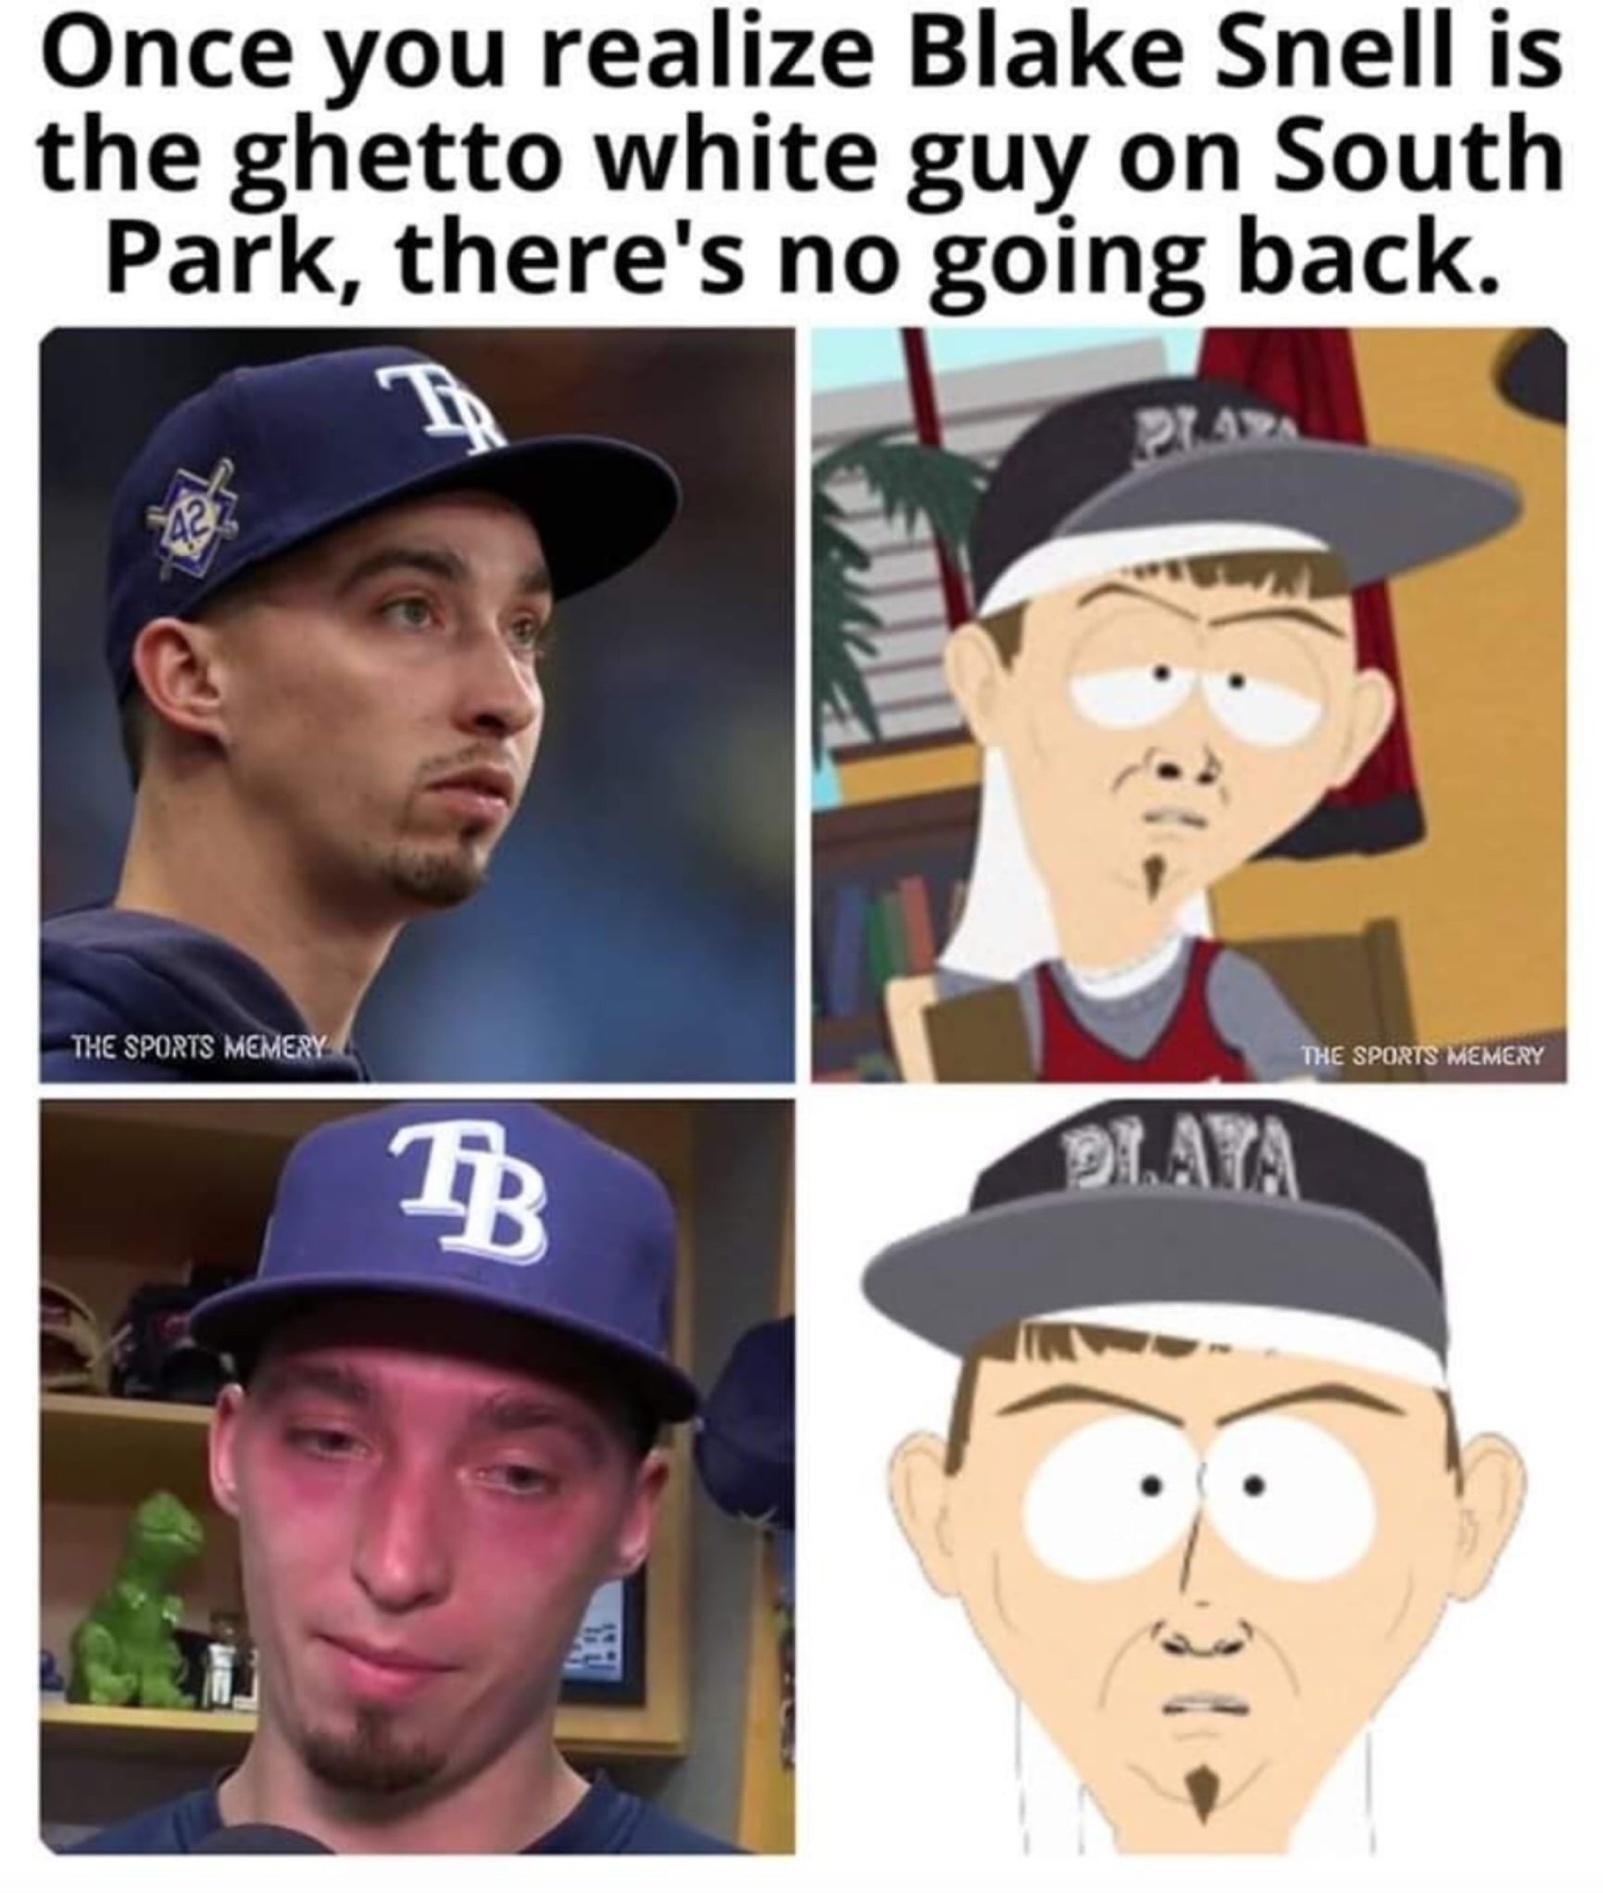 cap - Once you realize Blake Snell is the ghetto white guy on South Park, there's no going back. I The Sports Memery The Sports Memery Bb Plata